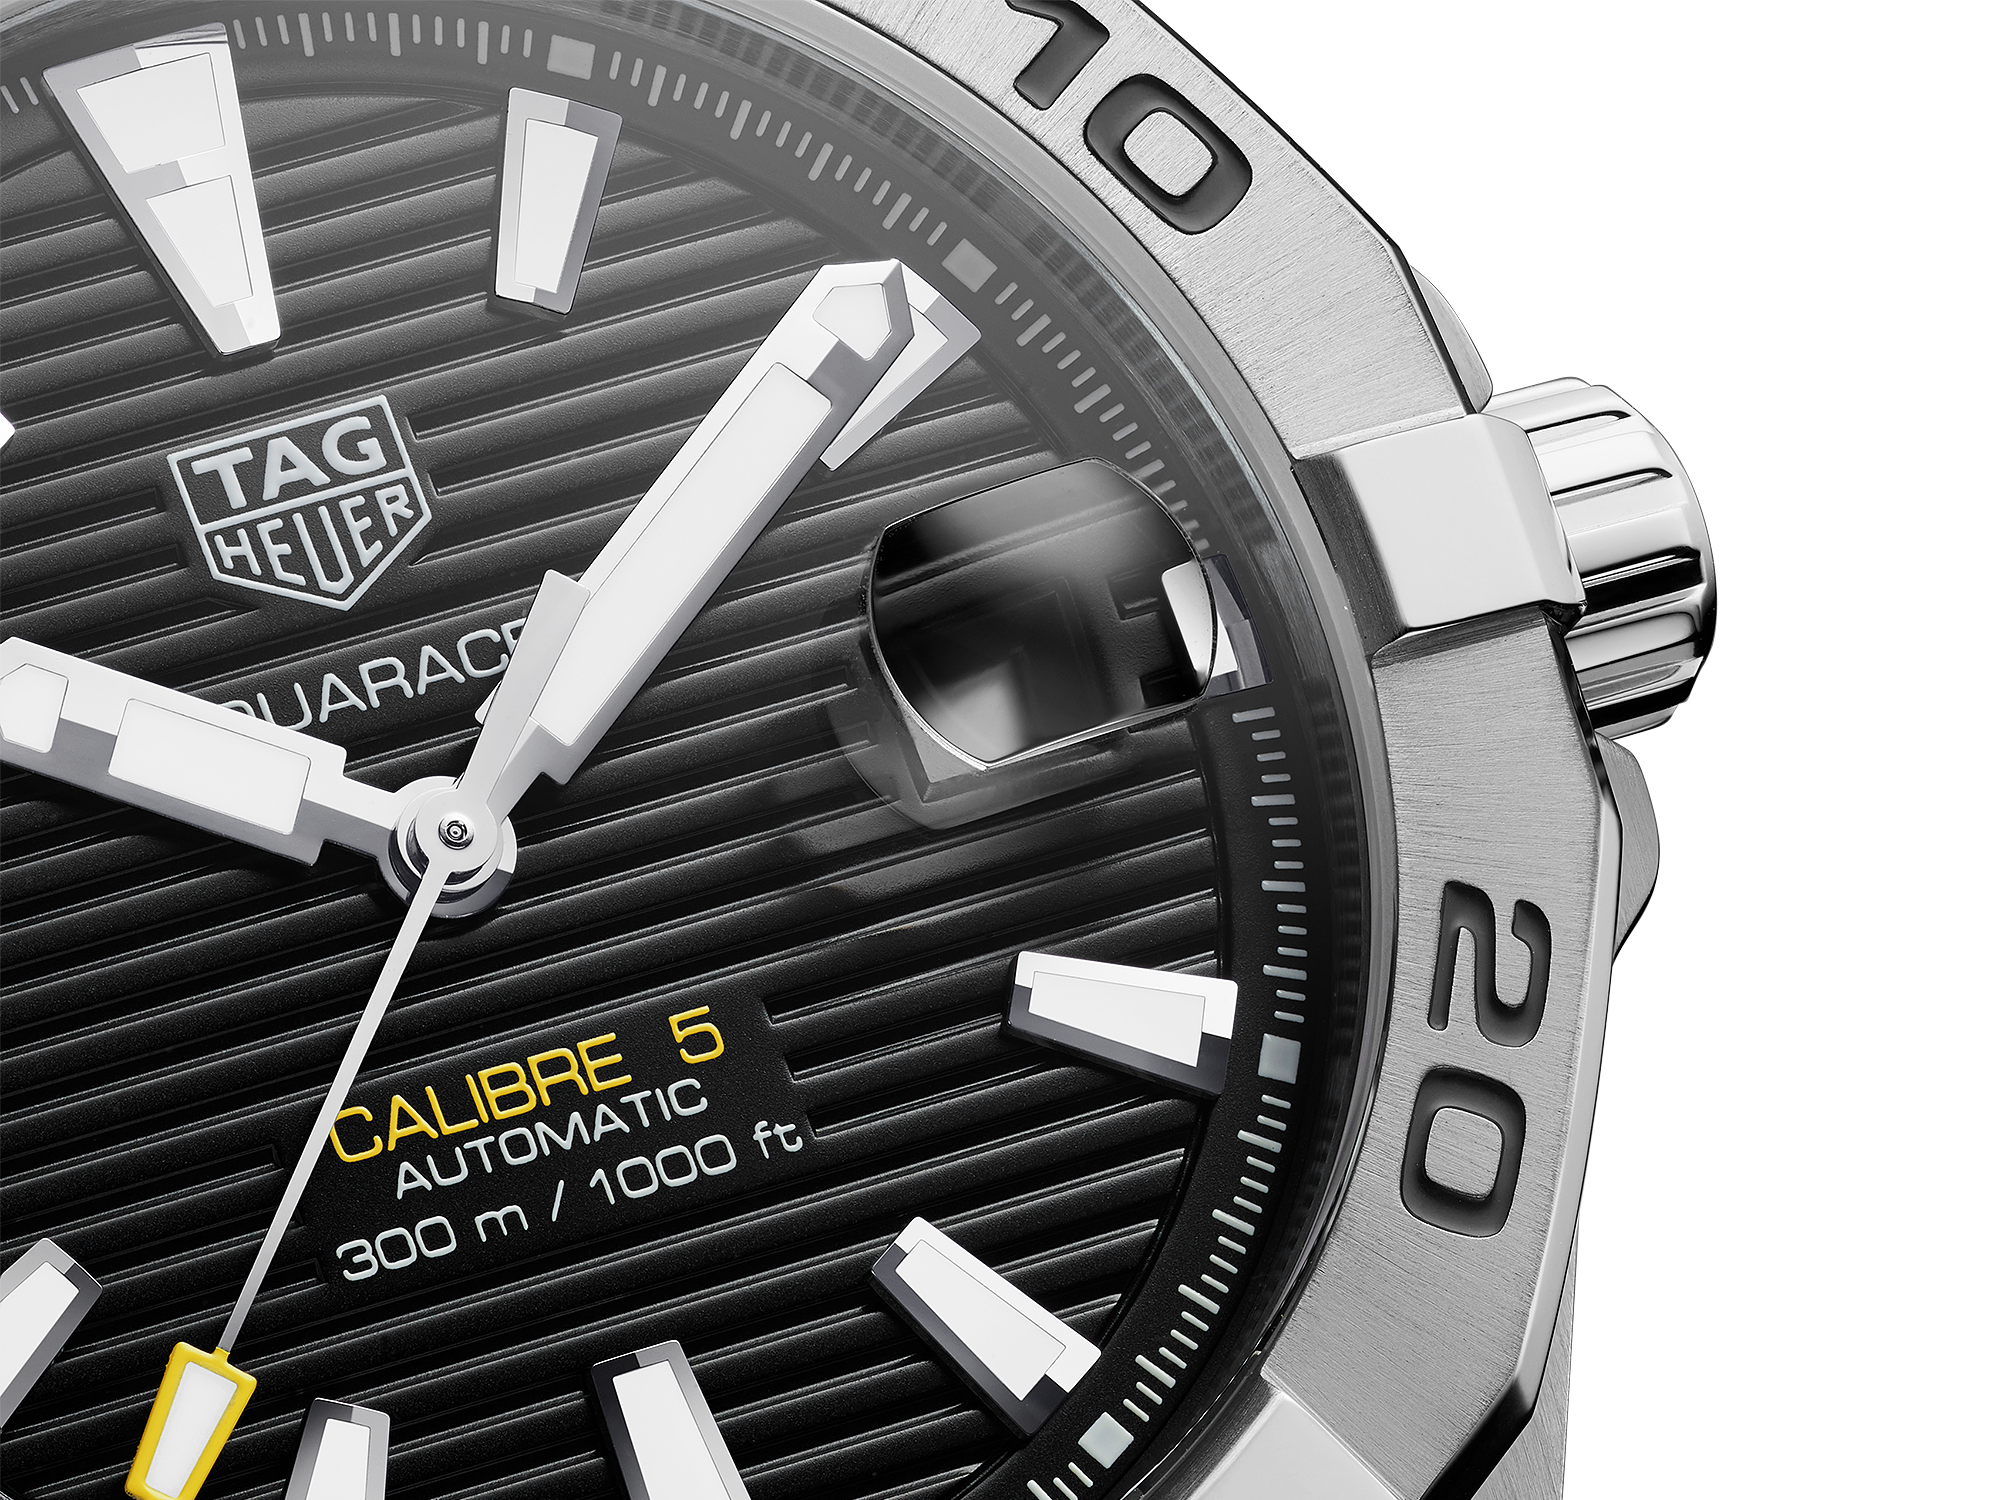 TAG Heuer Aquaracer Stainless Steel Men's Watch Big Date Ref. WAY111Z Box & Papers